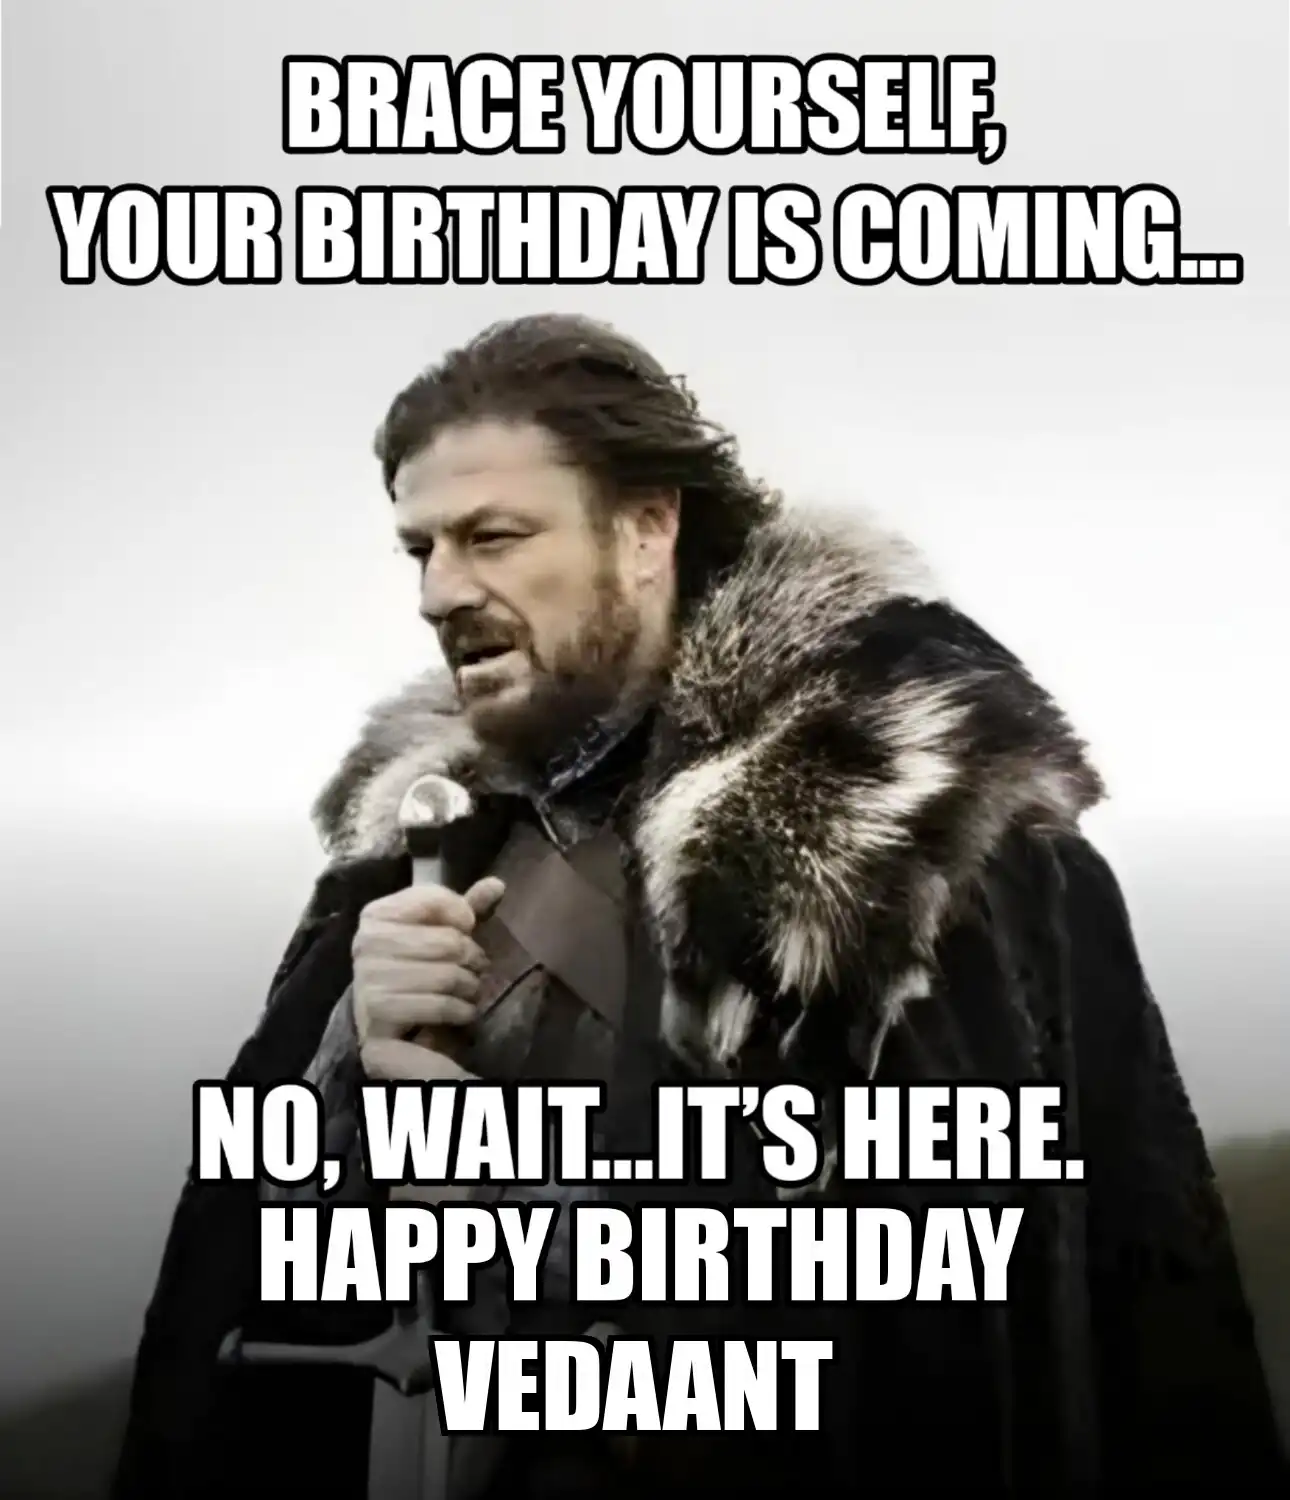 Happy Birthday Vedaant Brace Yourself Your Birthday Is Coming Meme